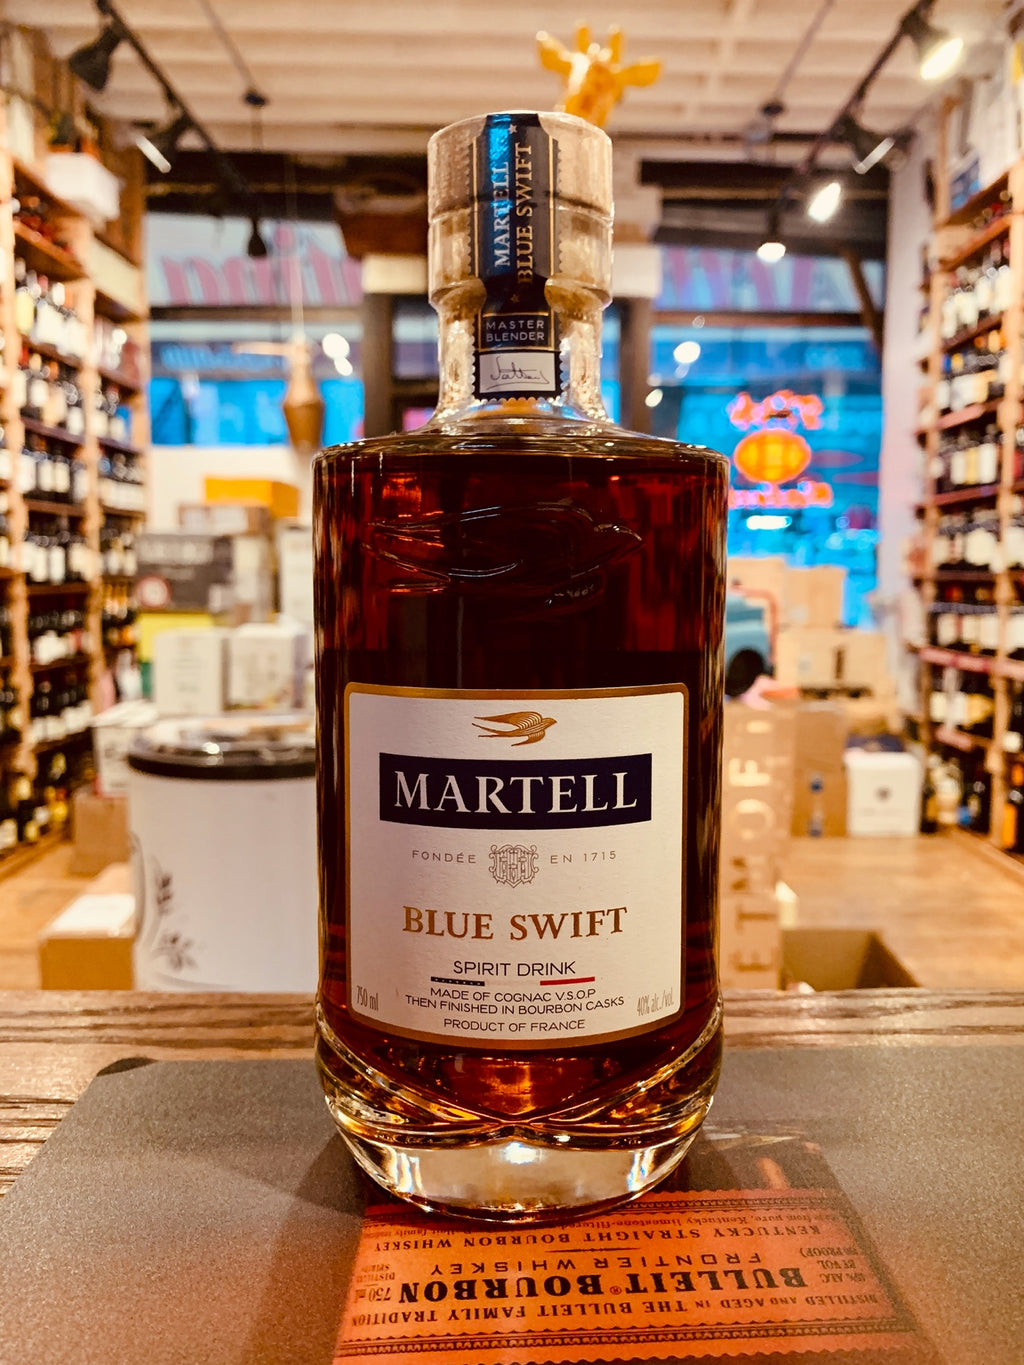 Martell Blue Swift VSOP 750mL a squat round shouldered bottle with a white label and wooden top